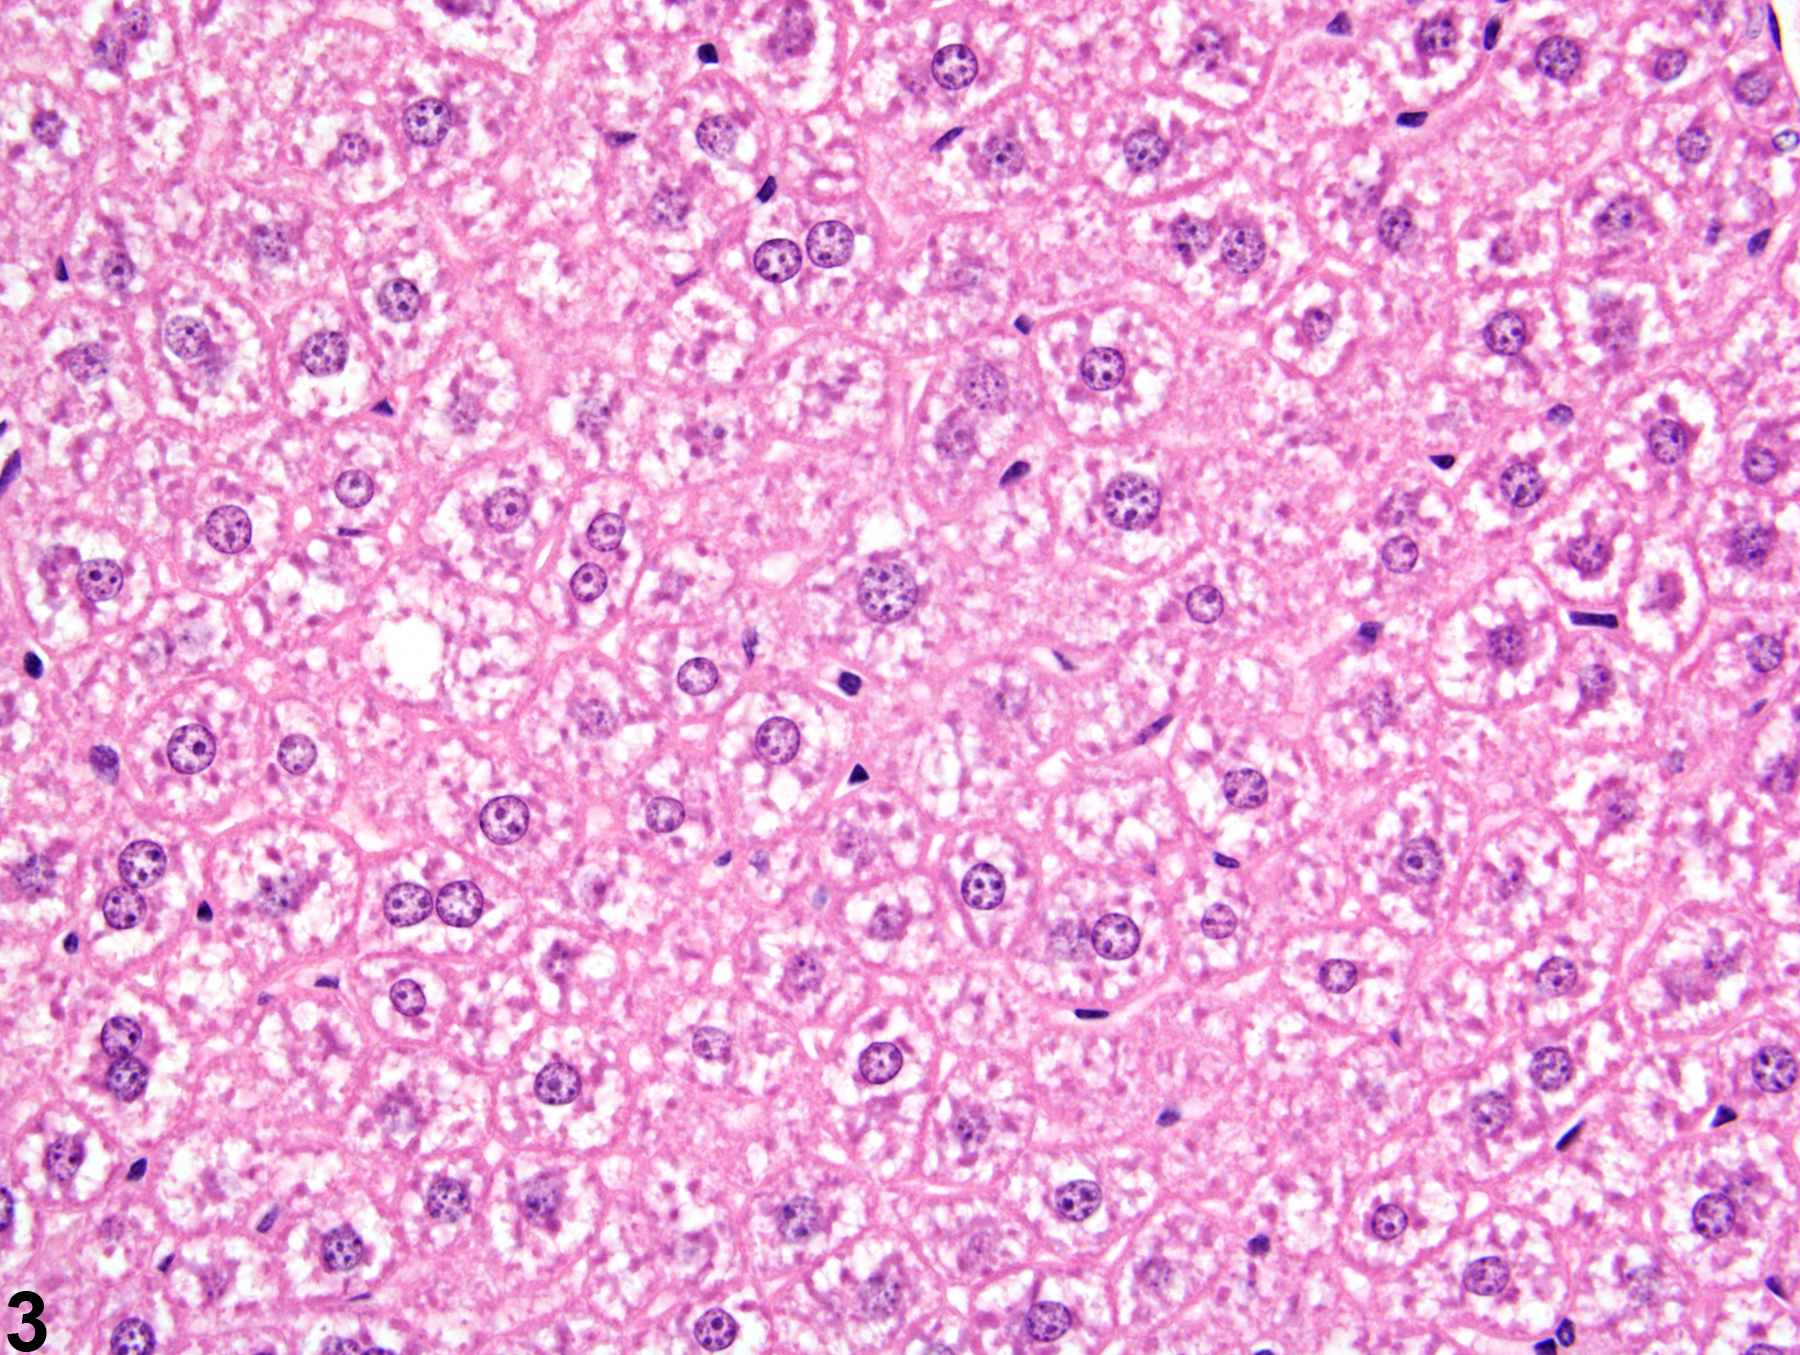 Image of glycogen accumulation in the liver from a male B6C3F1 mouse in a subchronic study